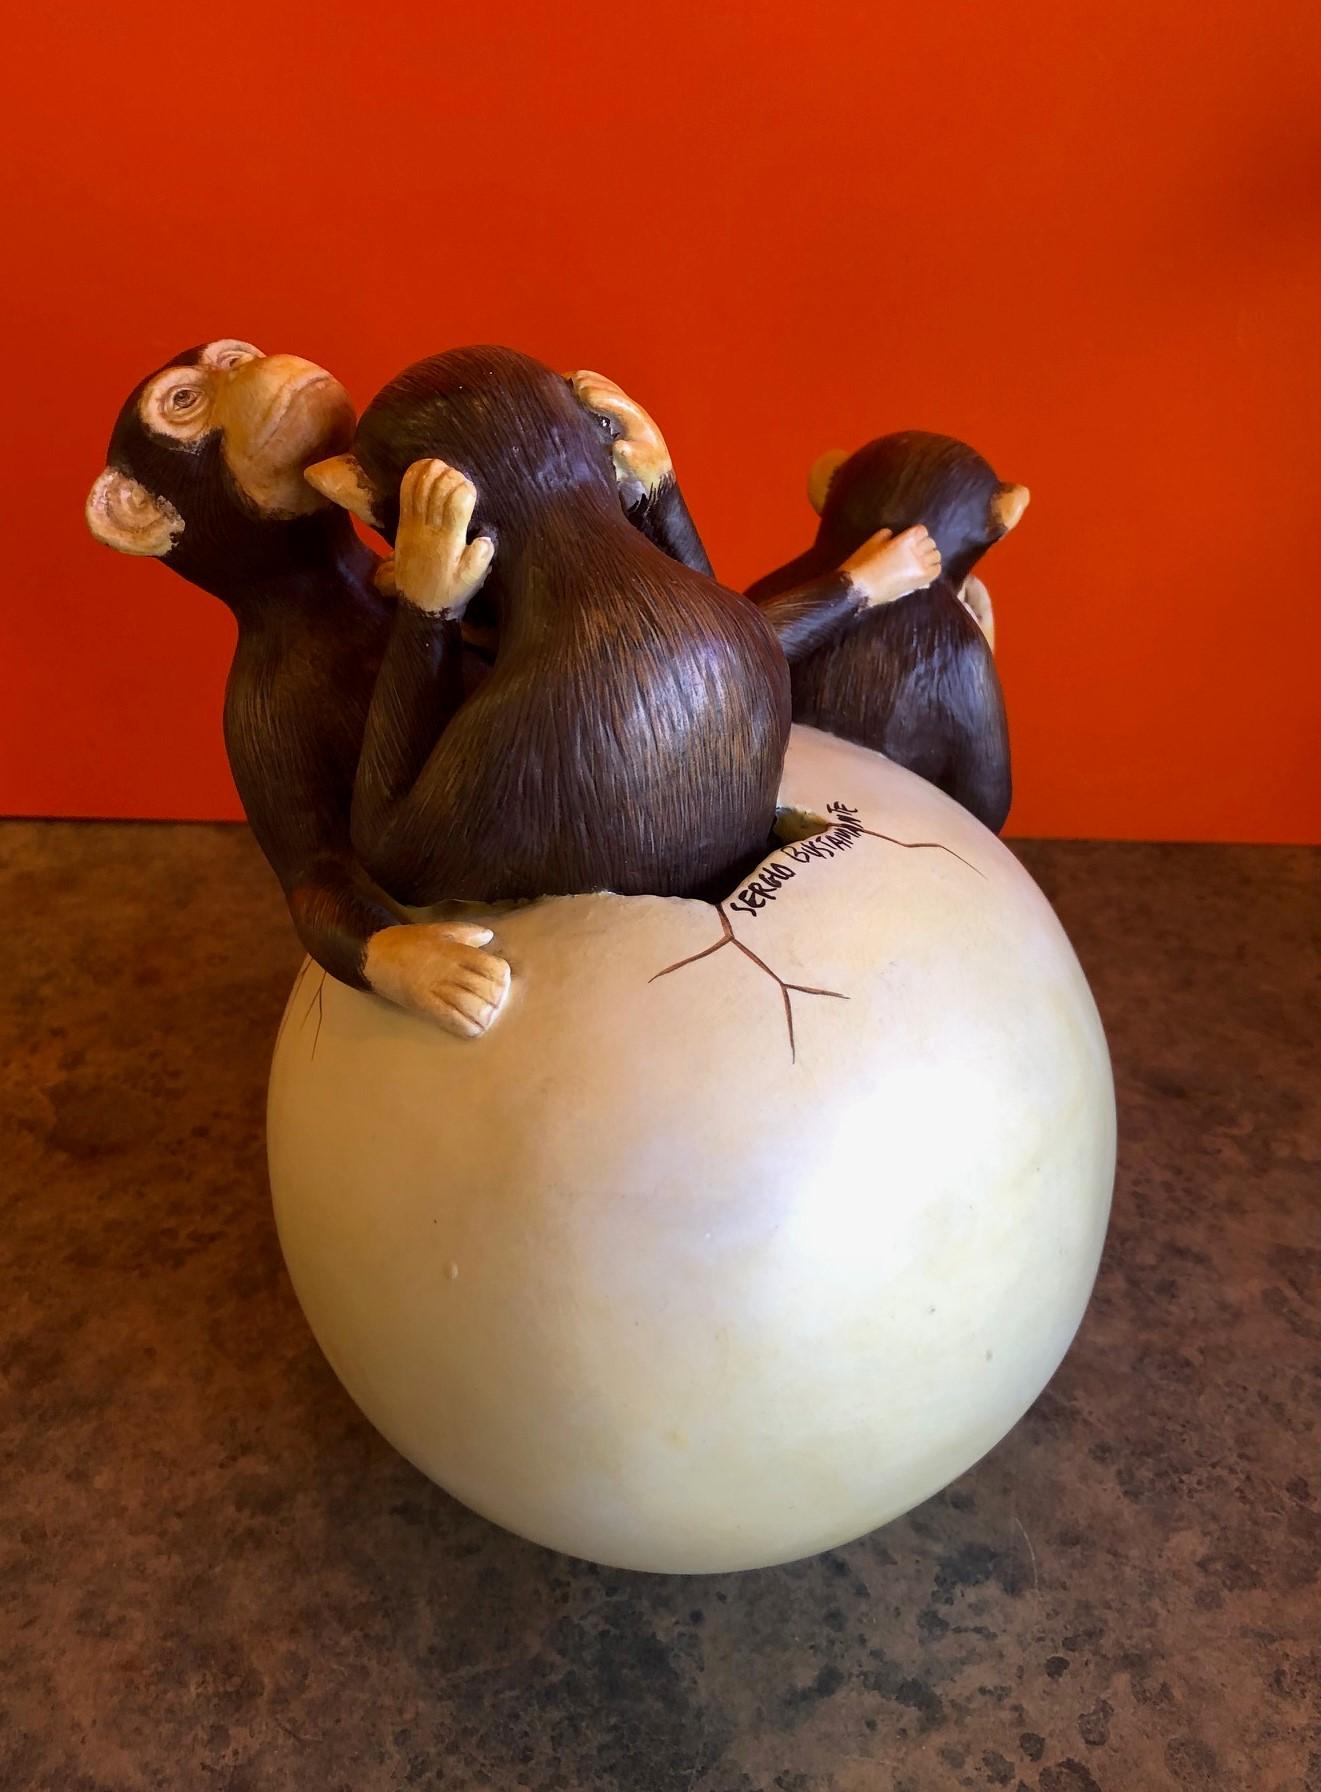 Mexican Ceramic Hatching Monkeys from Egg Sculpture by Sergio Bustamante